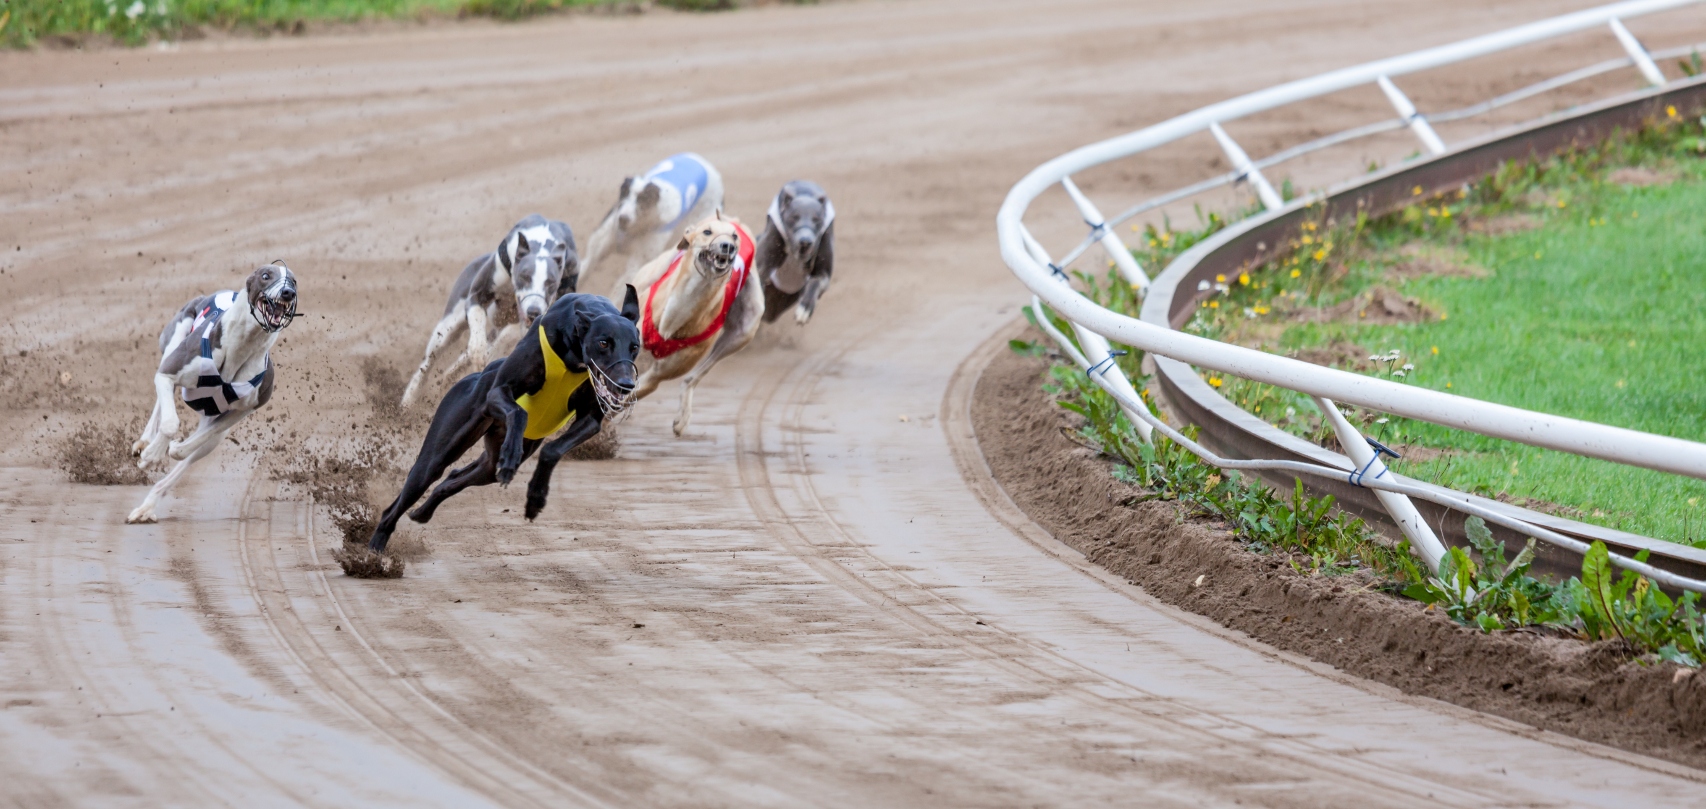 Growing calls to shut down greyhound racing at Wentworth Park